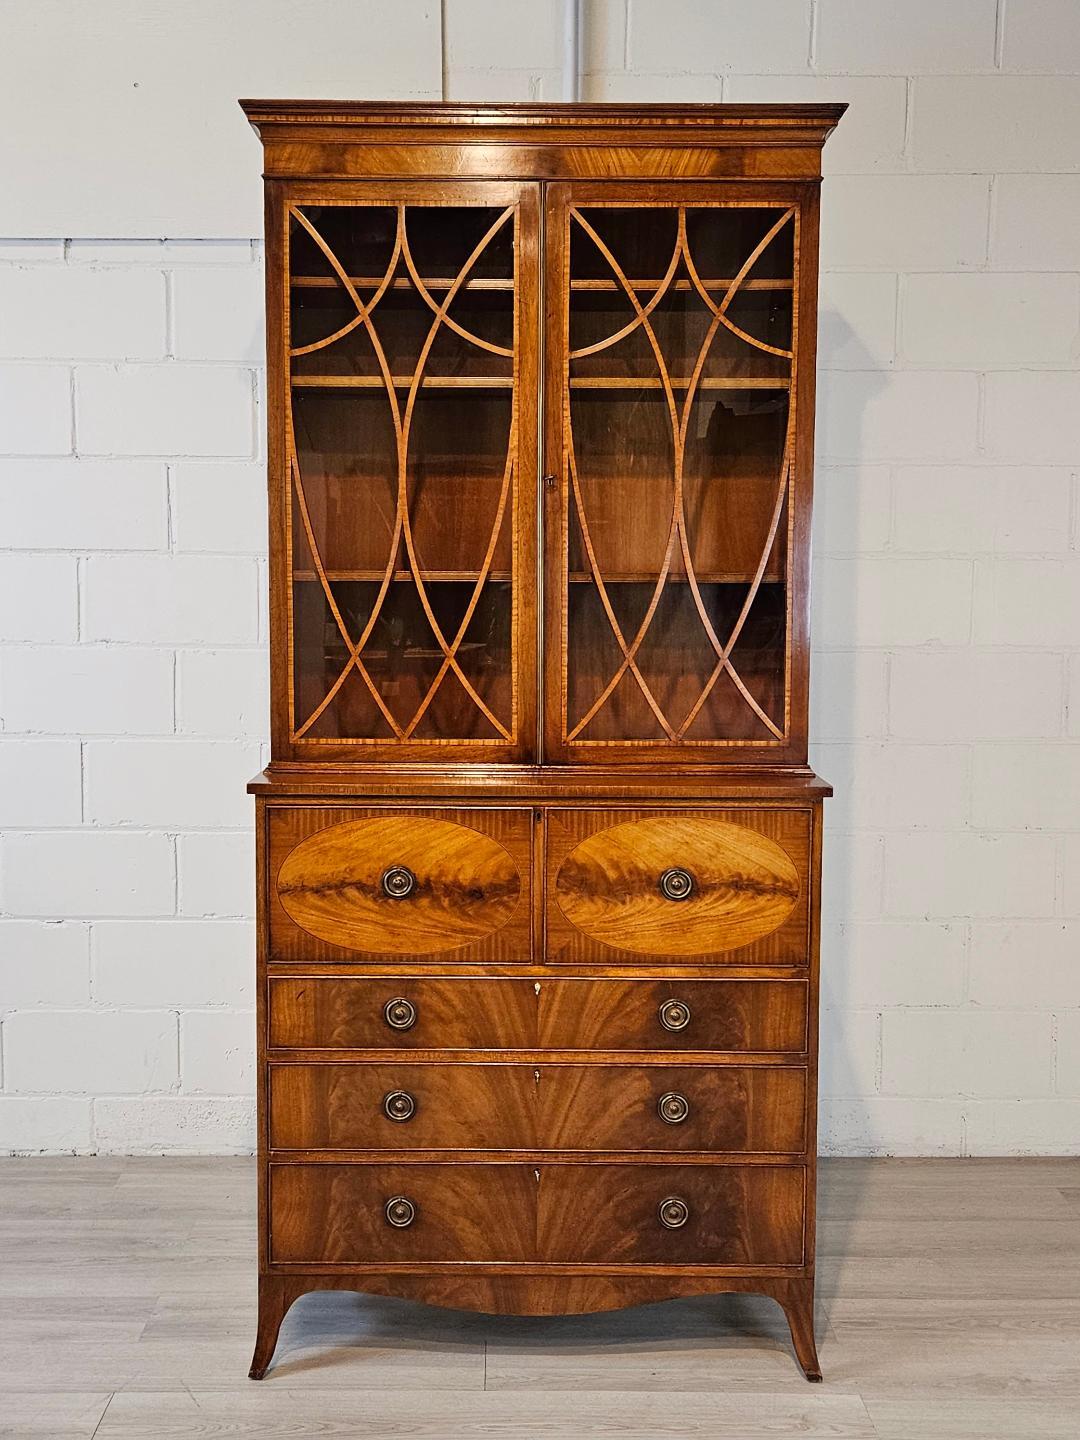 A stunning vintage Georgian style English secretary desk with bookcase top.  Crafted in mahogany with flamed mahogany drawer faces and satinwood accent woods and banding 
The top drawer drops down to reveal a desk area with a green leather writing